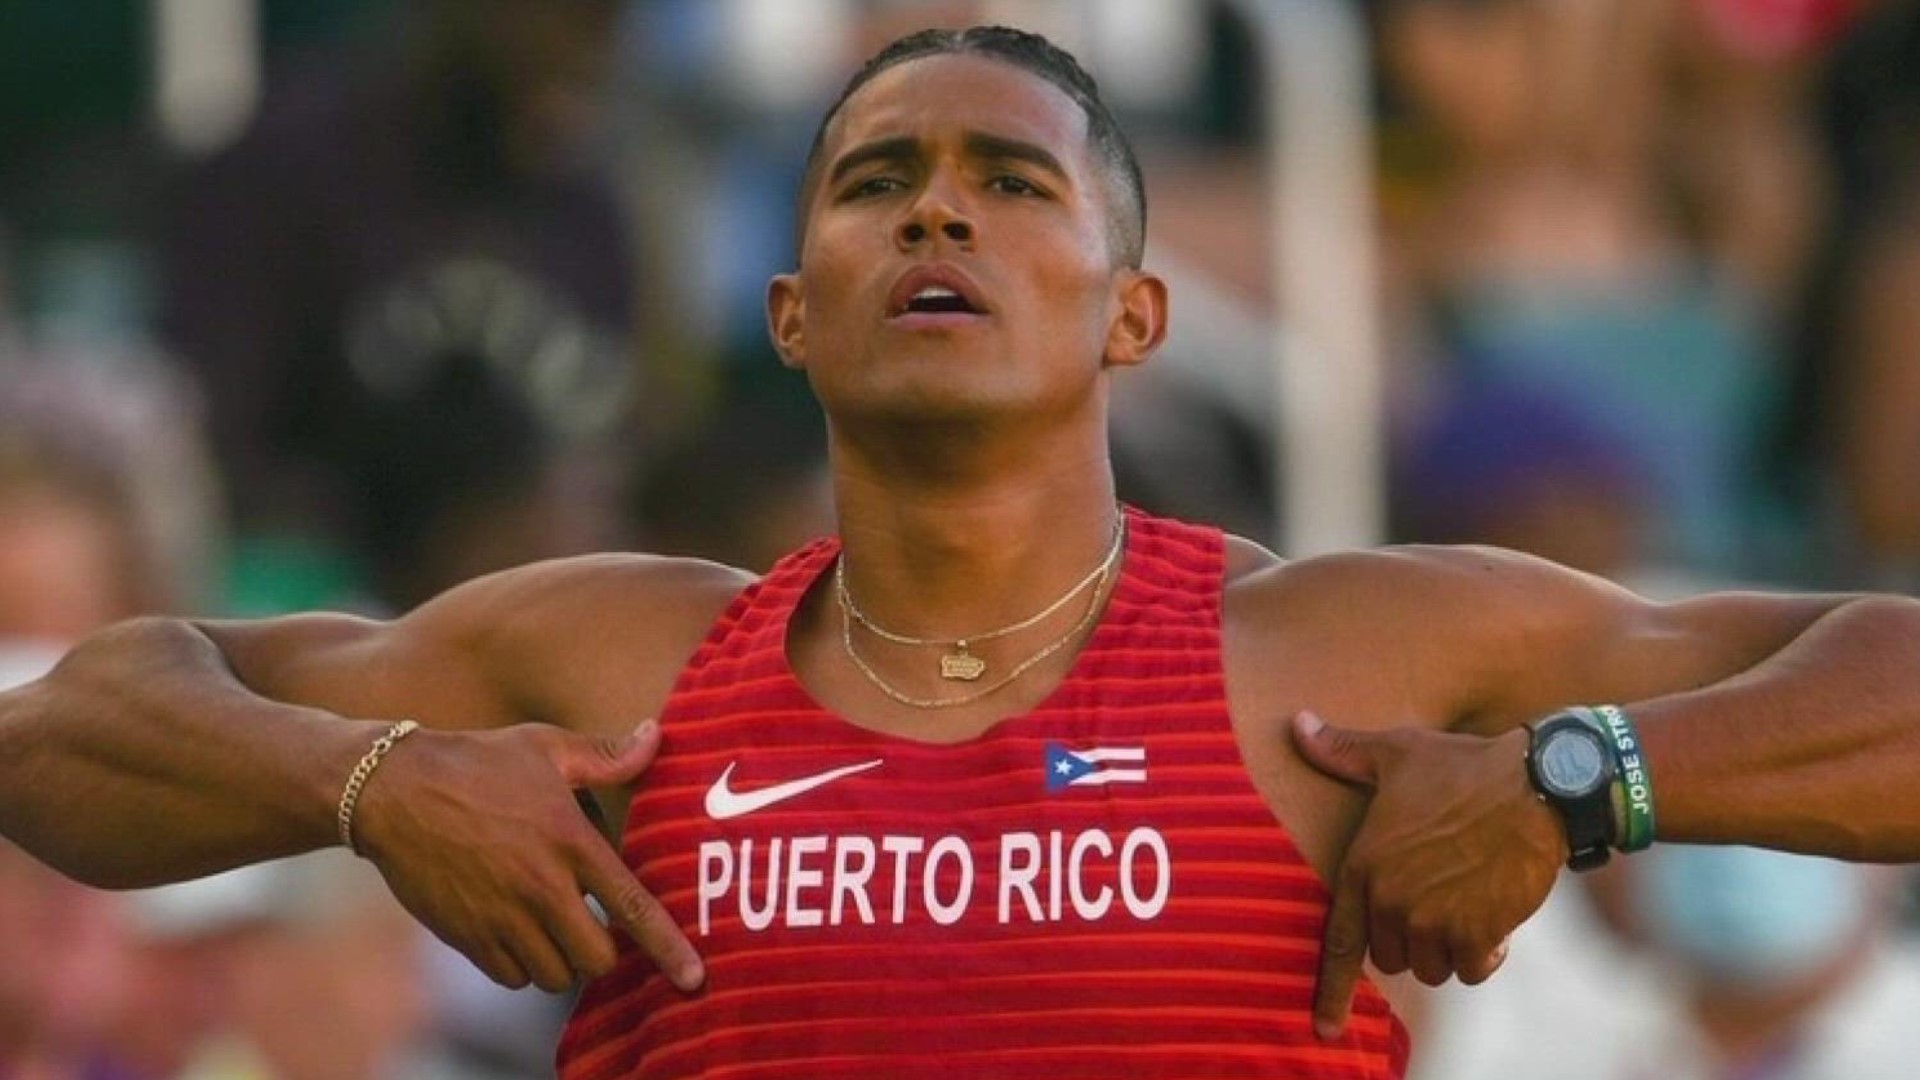 On this Hispanic Heritage Month, the NCAA decathlete champion discusses what his heritage means to him and representing Puerto Rico on the international stage.